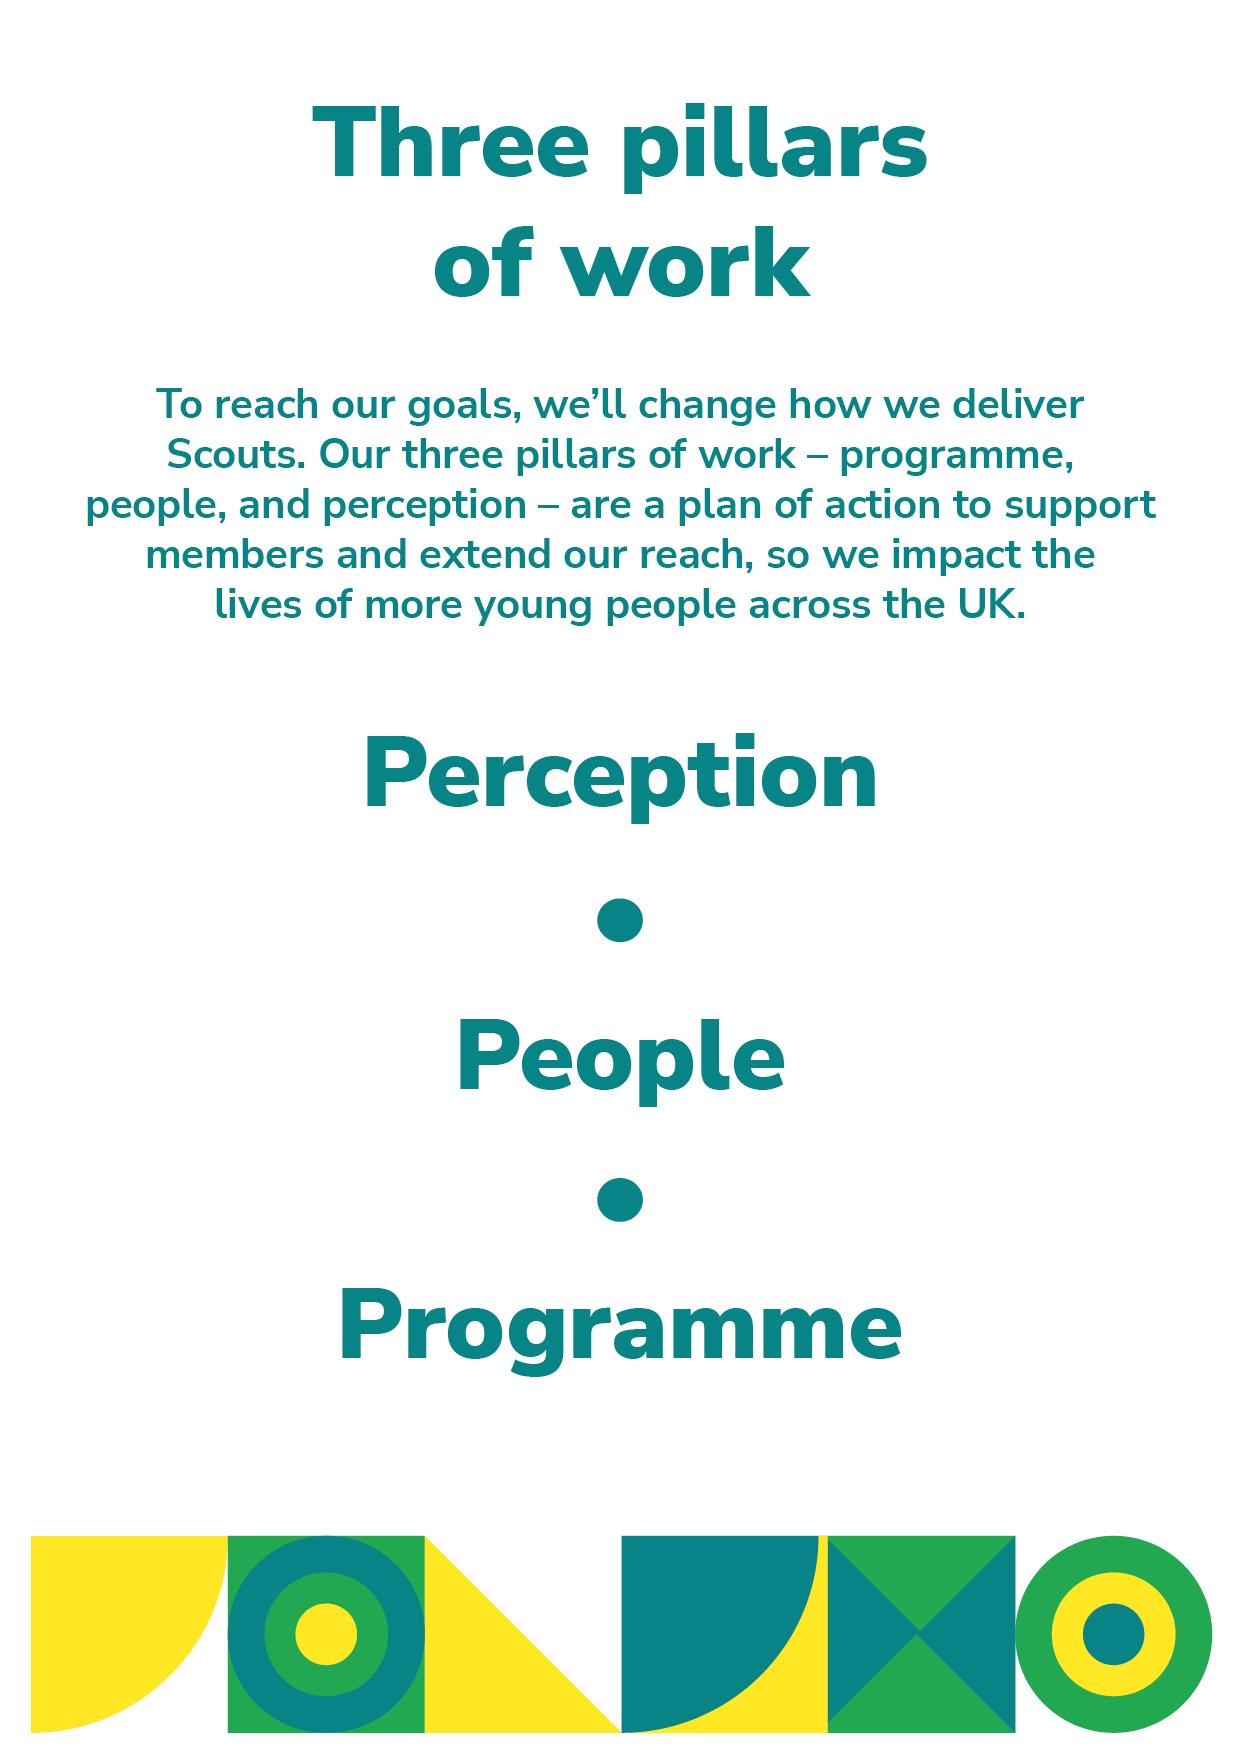 Our three pillars of work – programme, people, and perception – are a plan of action to support members and extend our reach